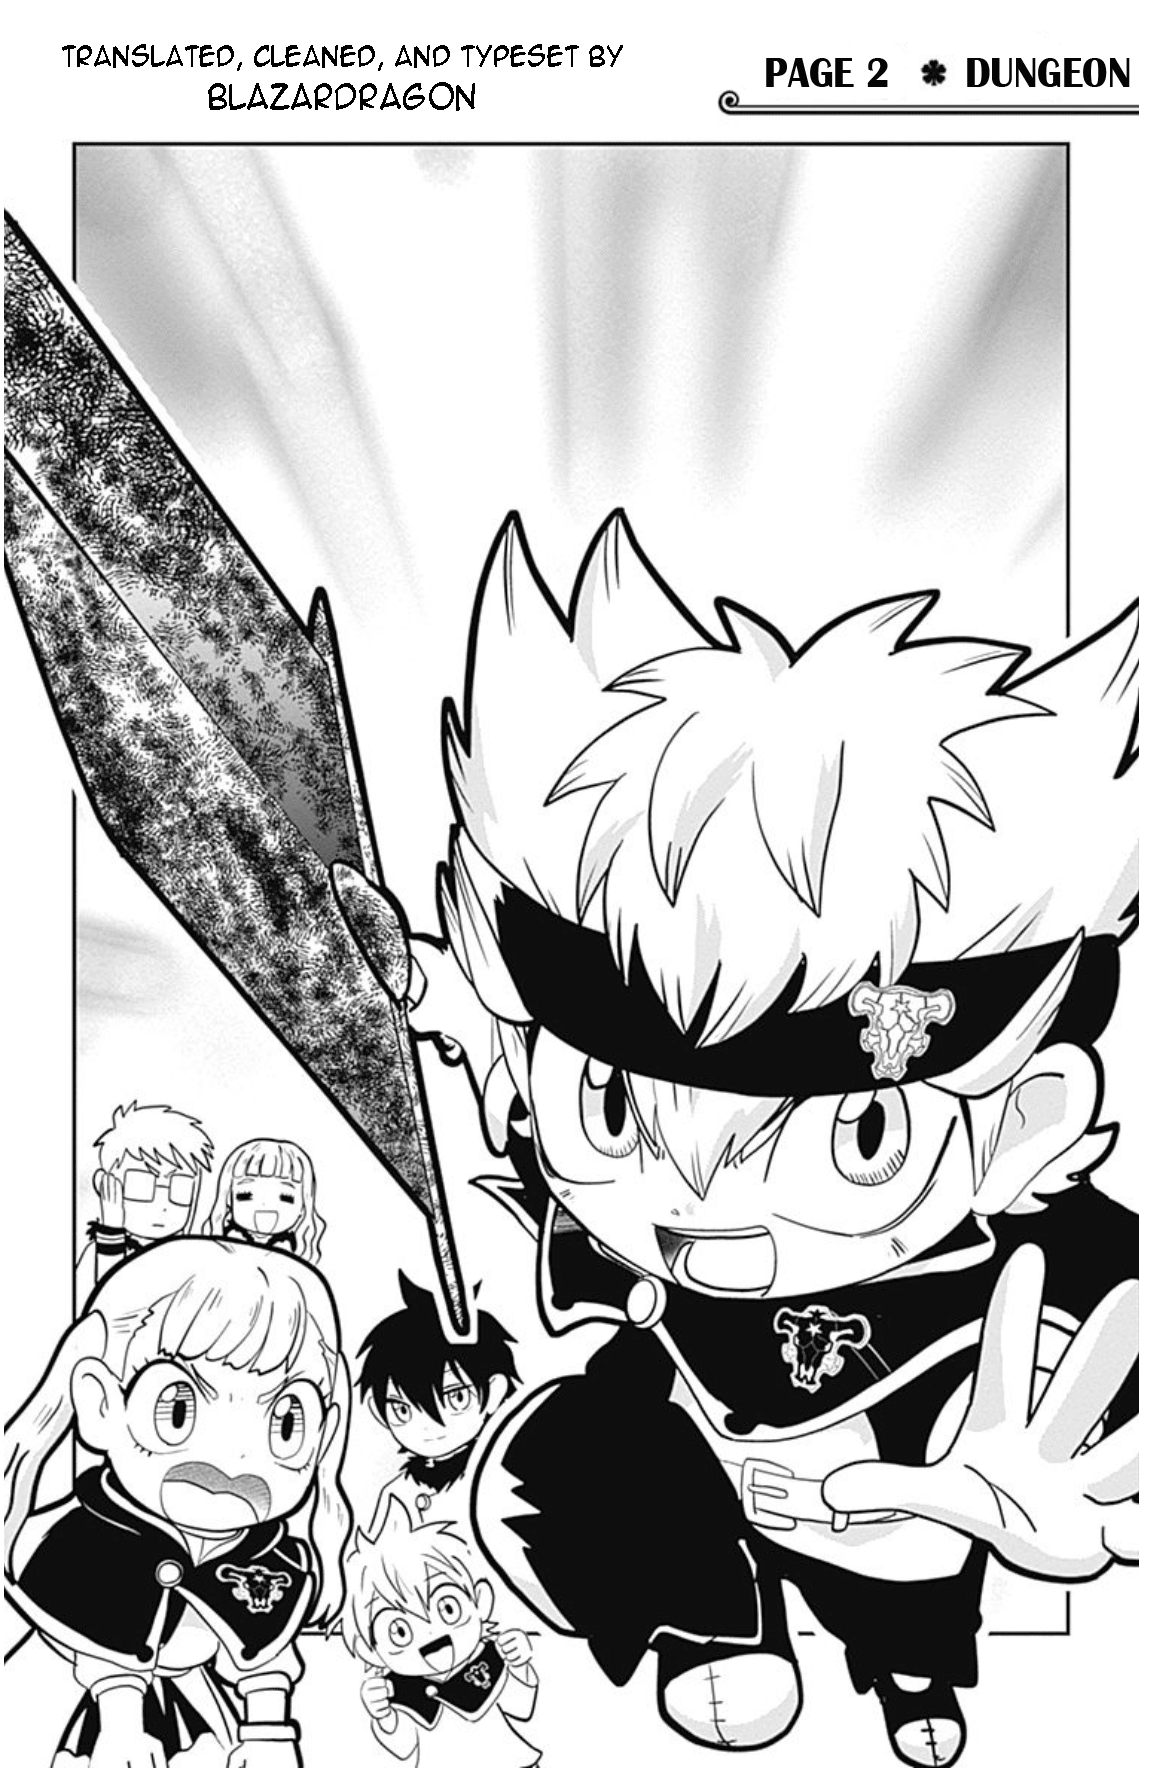 Black Clover Sd - Asta's Road To The Wizard King Vol.1 Chapter 2: Dungeon - Picture 1